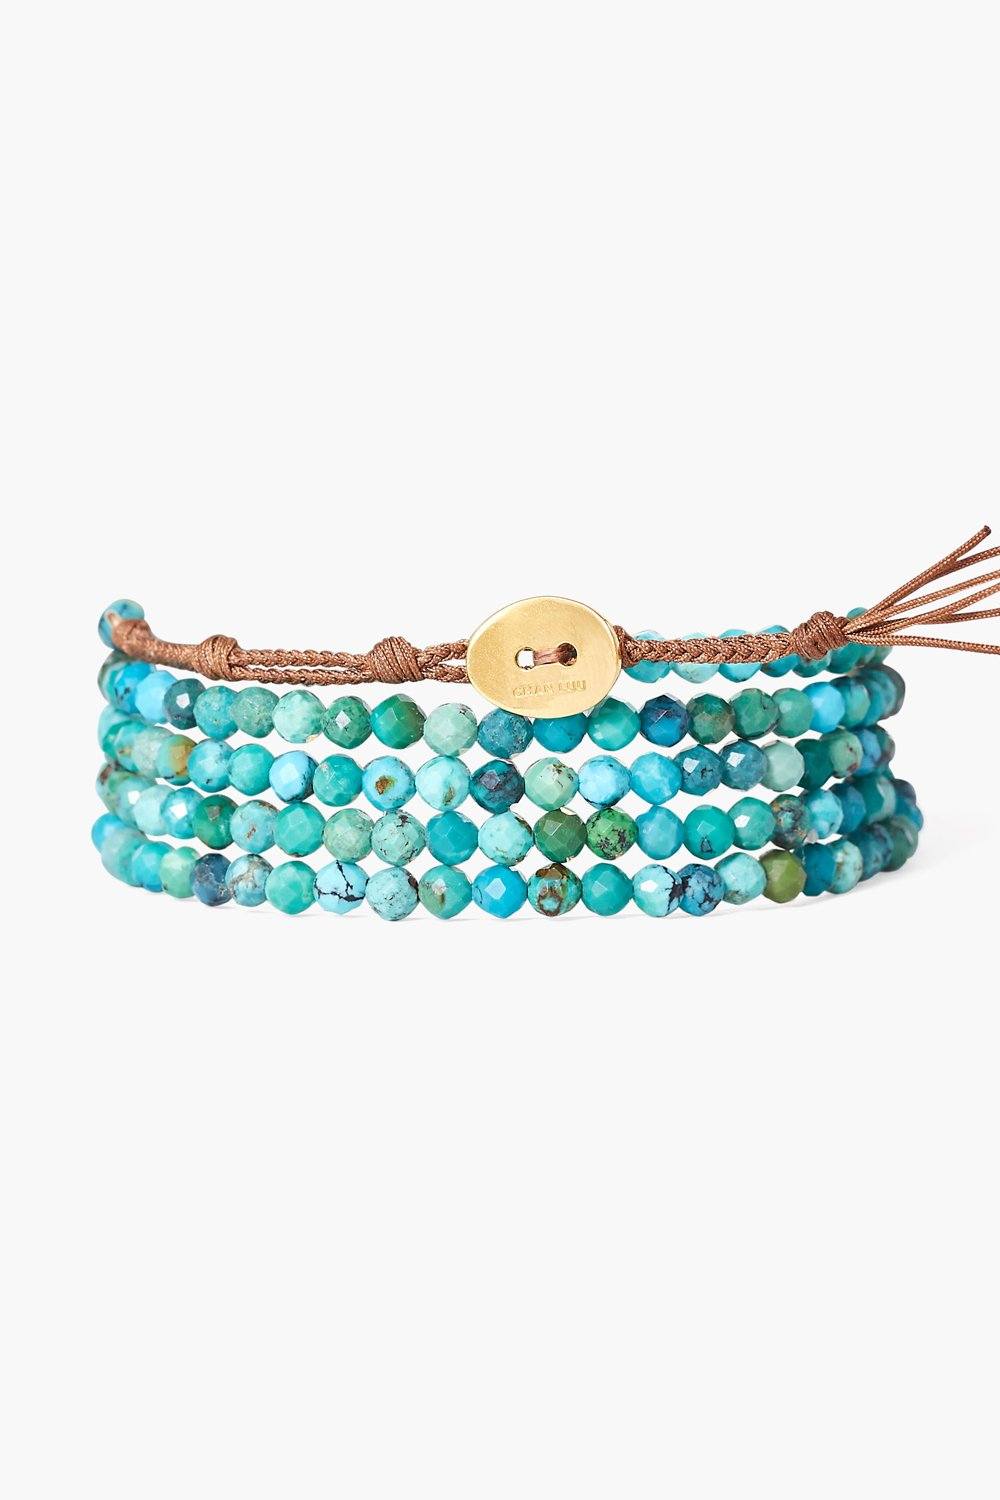 Turquoise Mix Gold Coin Wrap Bracelet Chan Luu